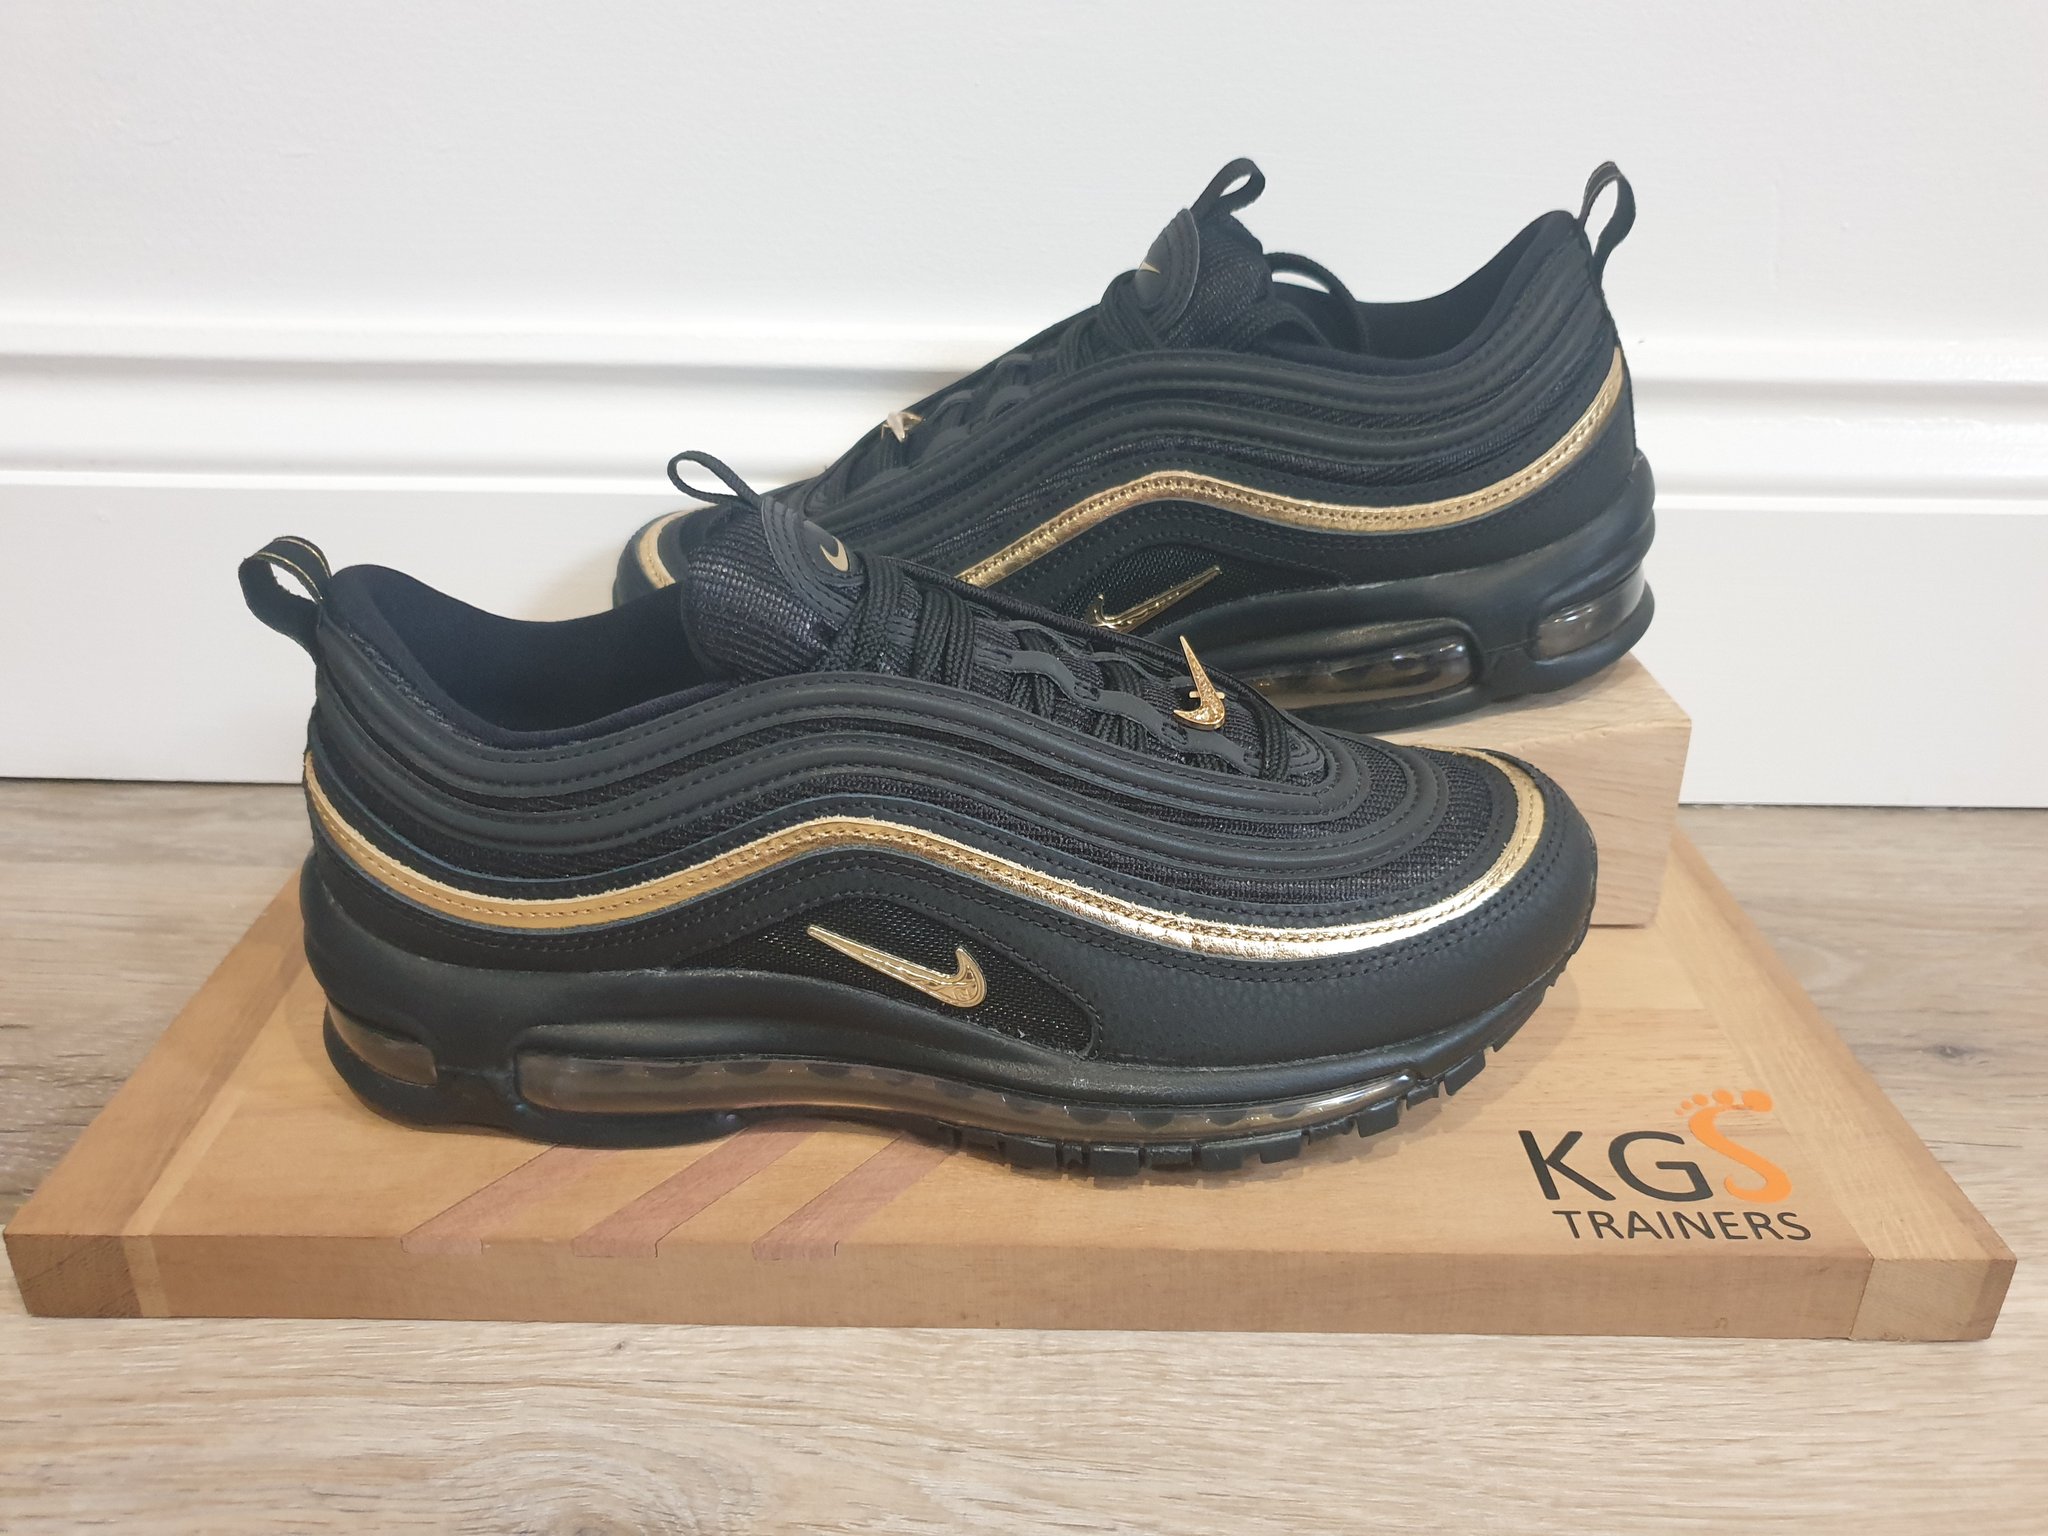 KGS Trainers on Twitter: "Nike Air Max 97 Size 7 UK only BNIB £110  delivered DM to purchase #Nike #AirMax97 #nikeair #gold #trainers #sneakers  #sneakerhead #justdoit #swoosh #Nikes https://t.co/oPYtvJfyiP" / Twitter